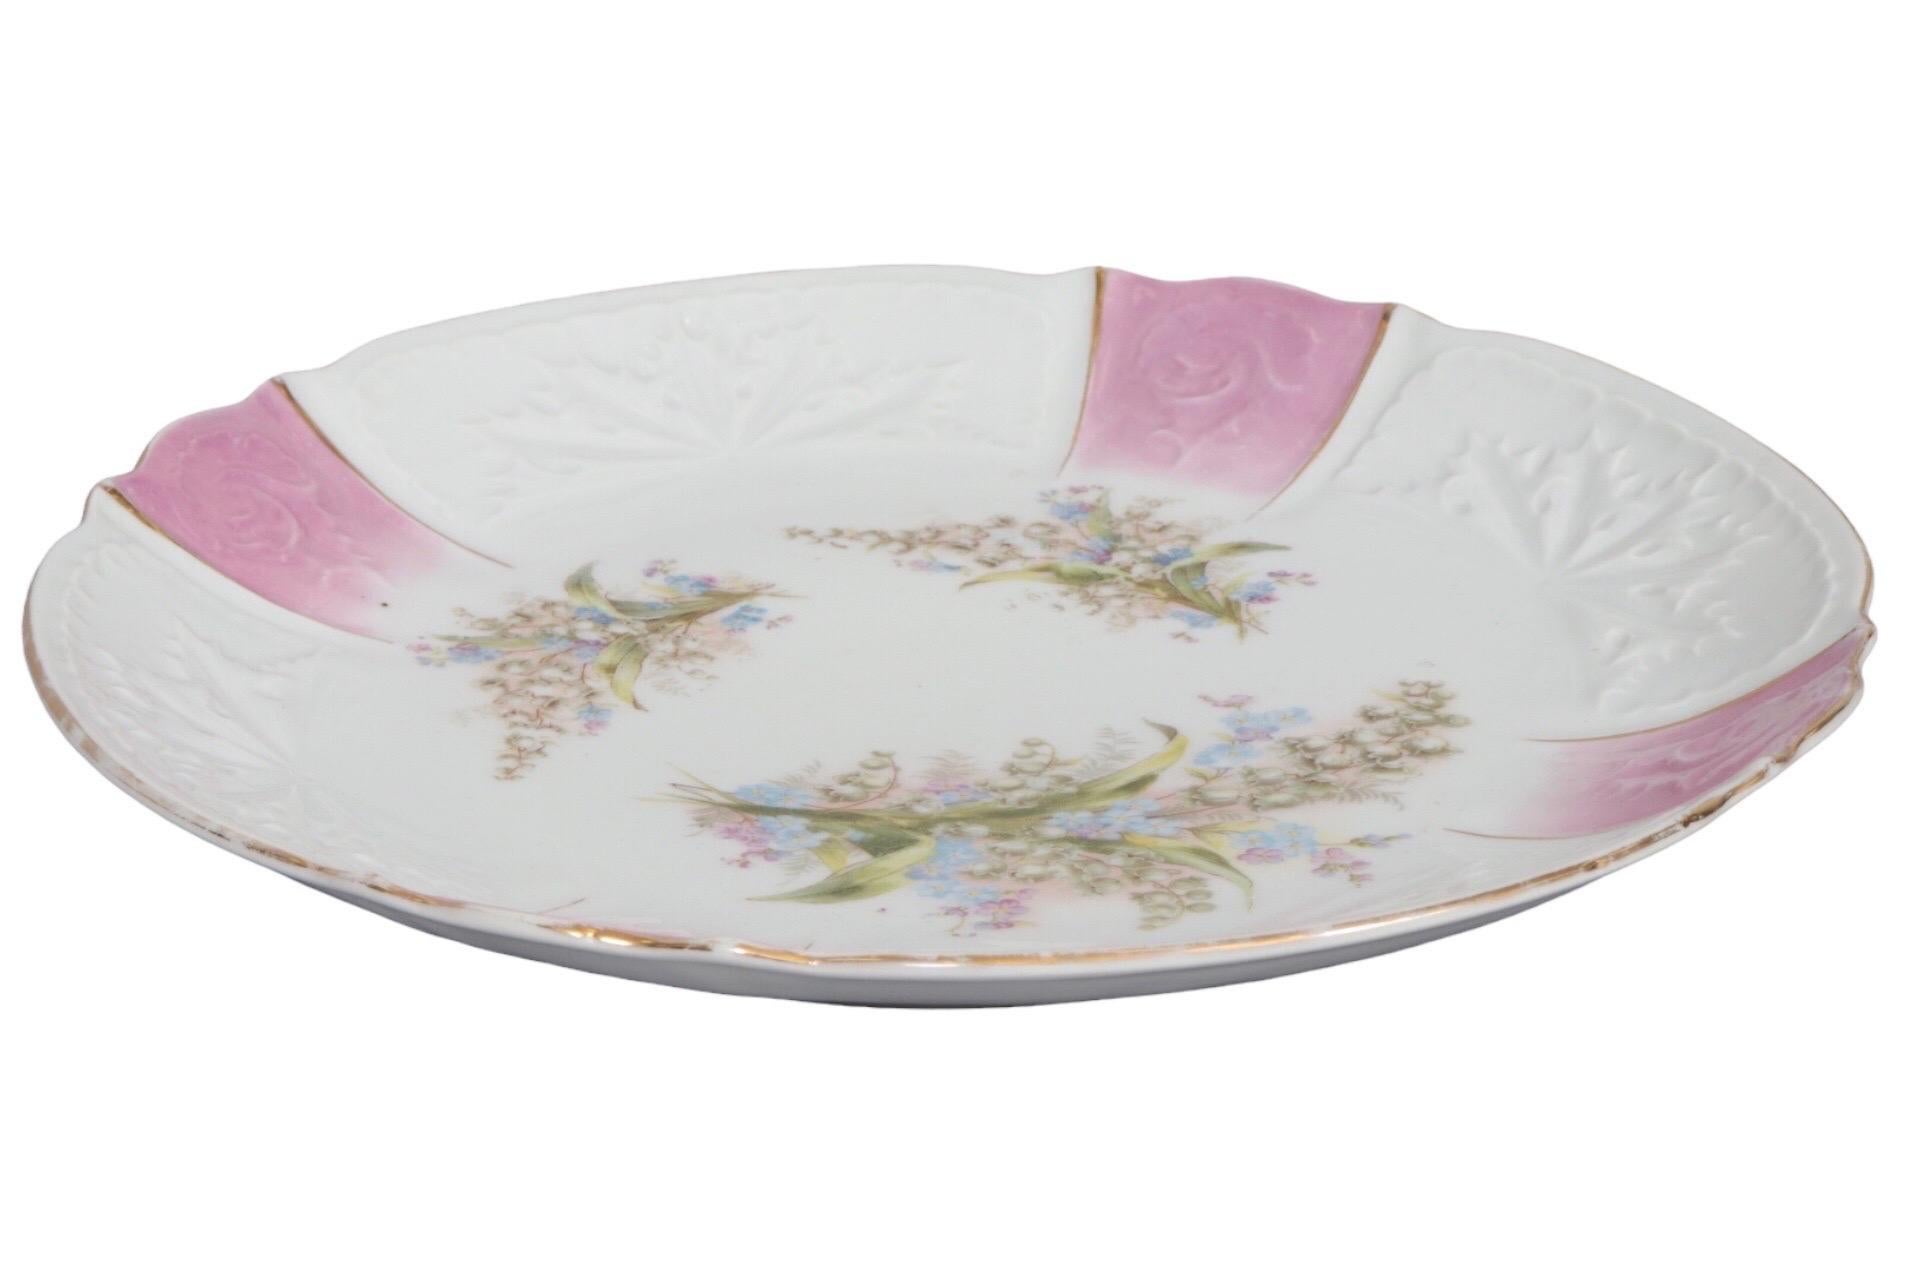 A Bavarian style ceramic serving plate. Hand painted in the center with wild violets and ivory bells. The outer band is embossed with holly leaves and roses, with bands of iridescent pink and trimmed with a gilt line along the serpentine edge.